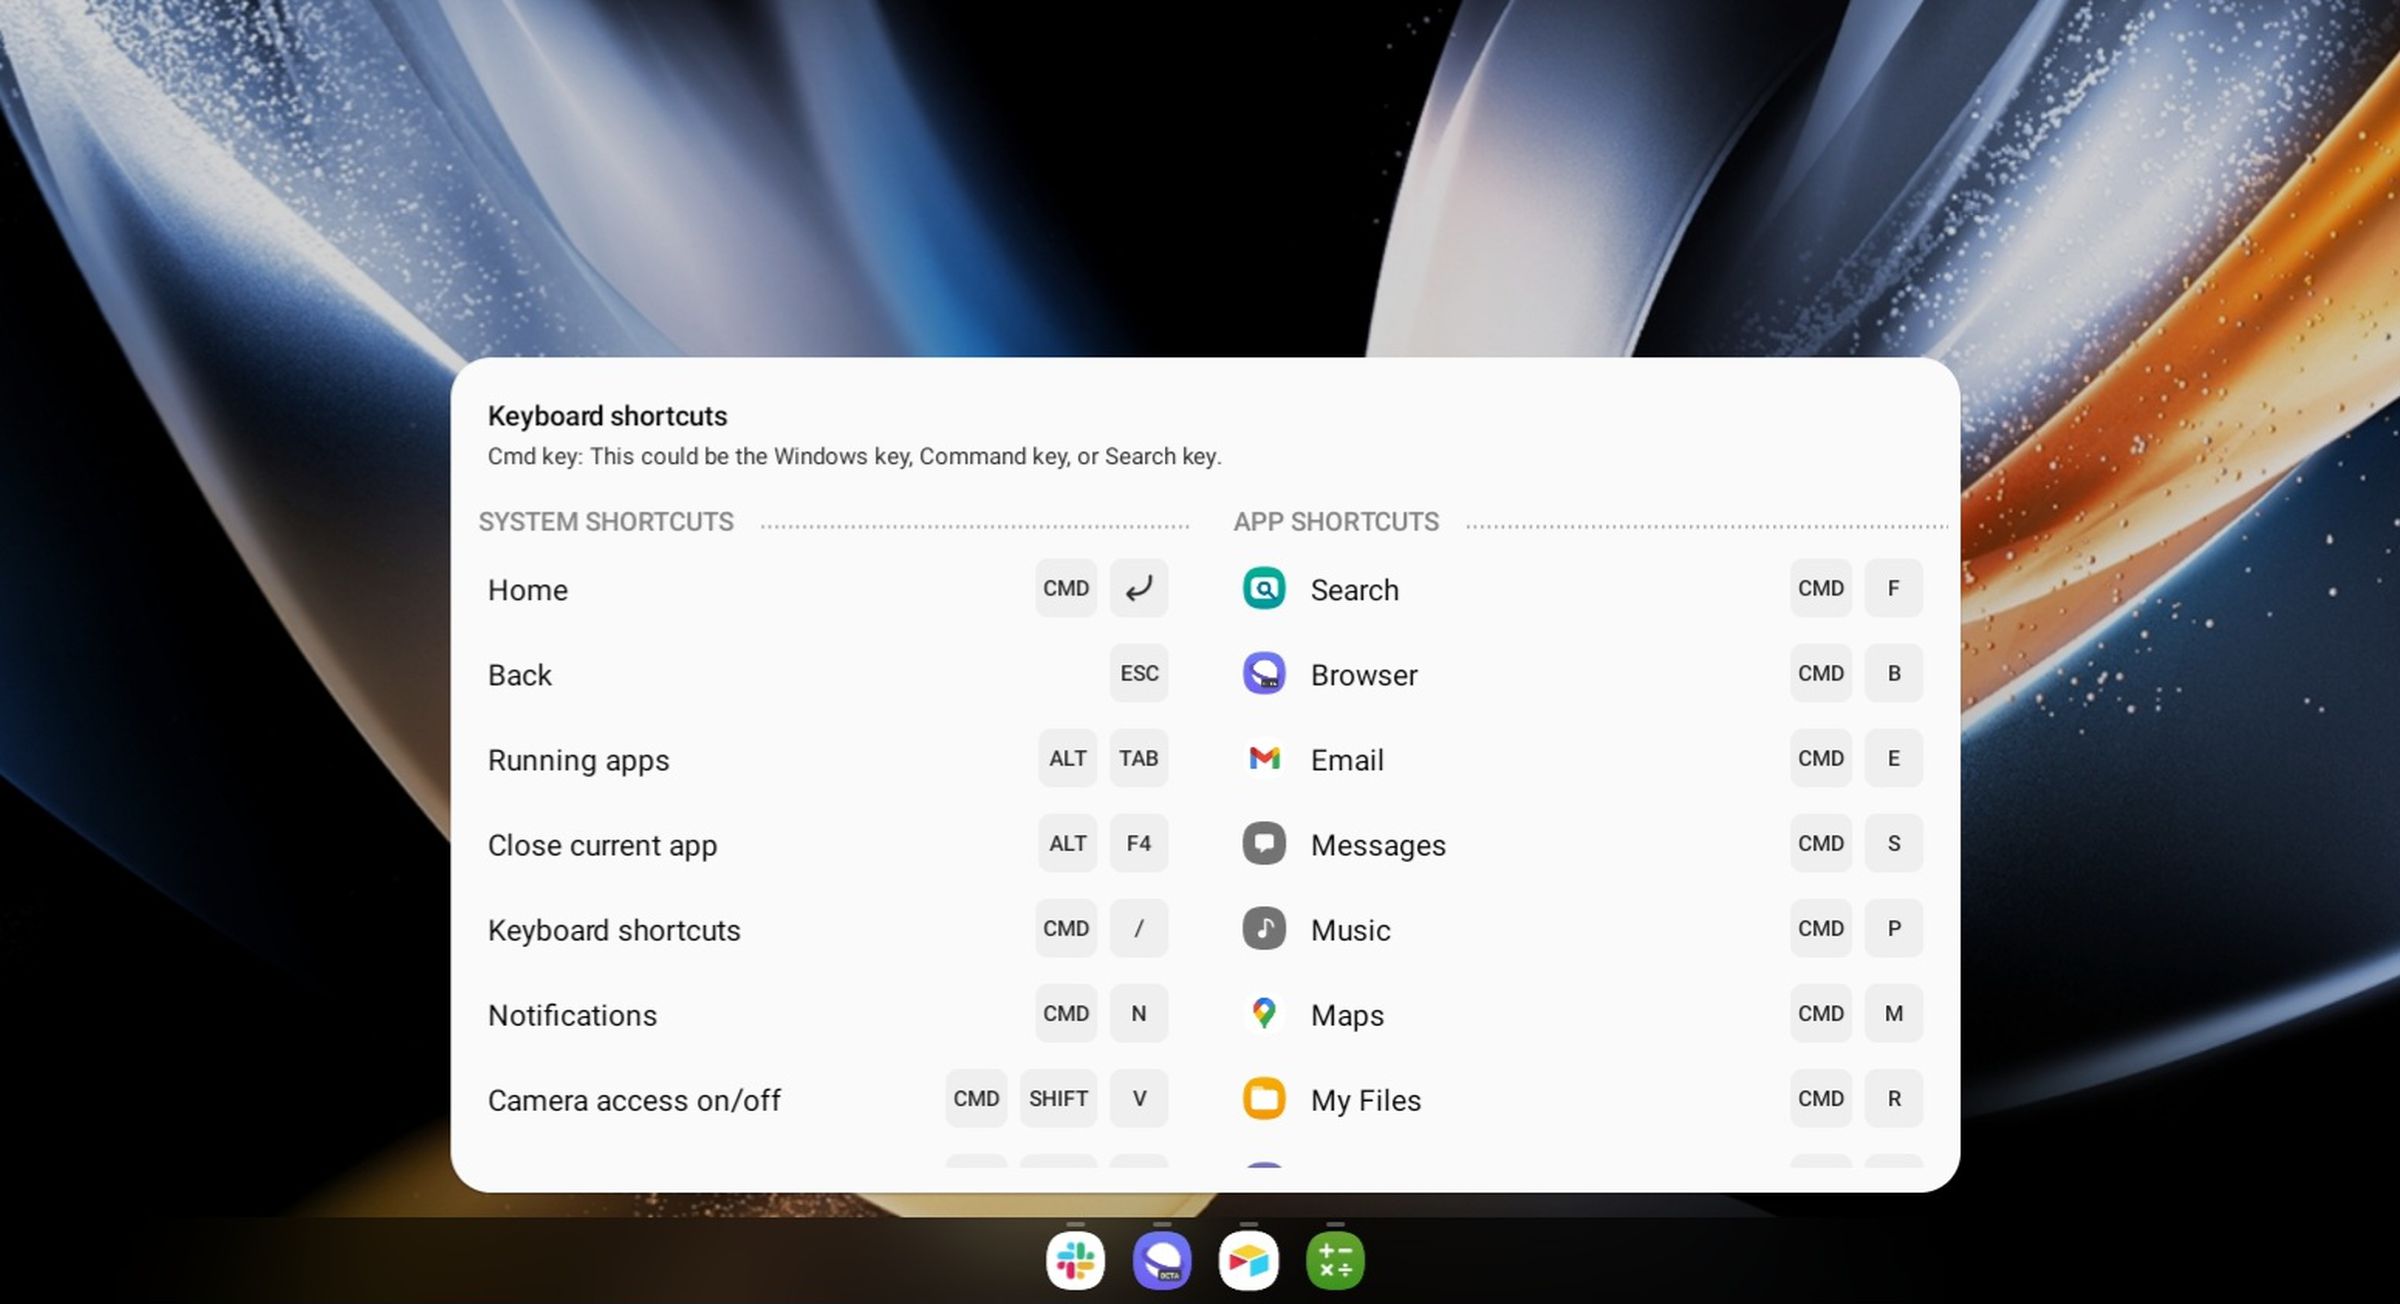 Dex now offers a surprisingly long list of supported keyboard shortcuts to make navigation feel even more like a traditional desktop operating system.